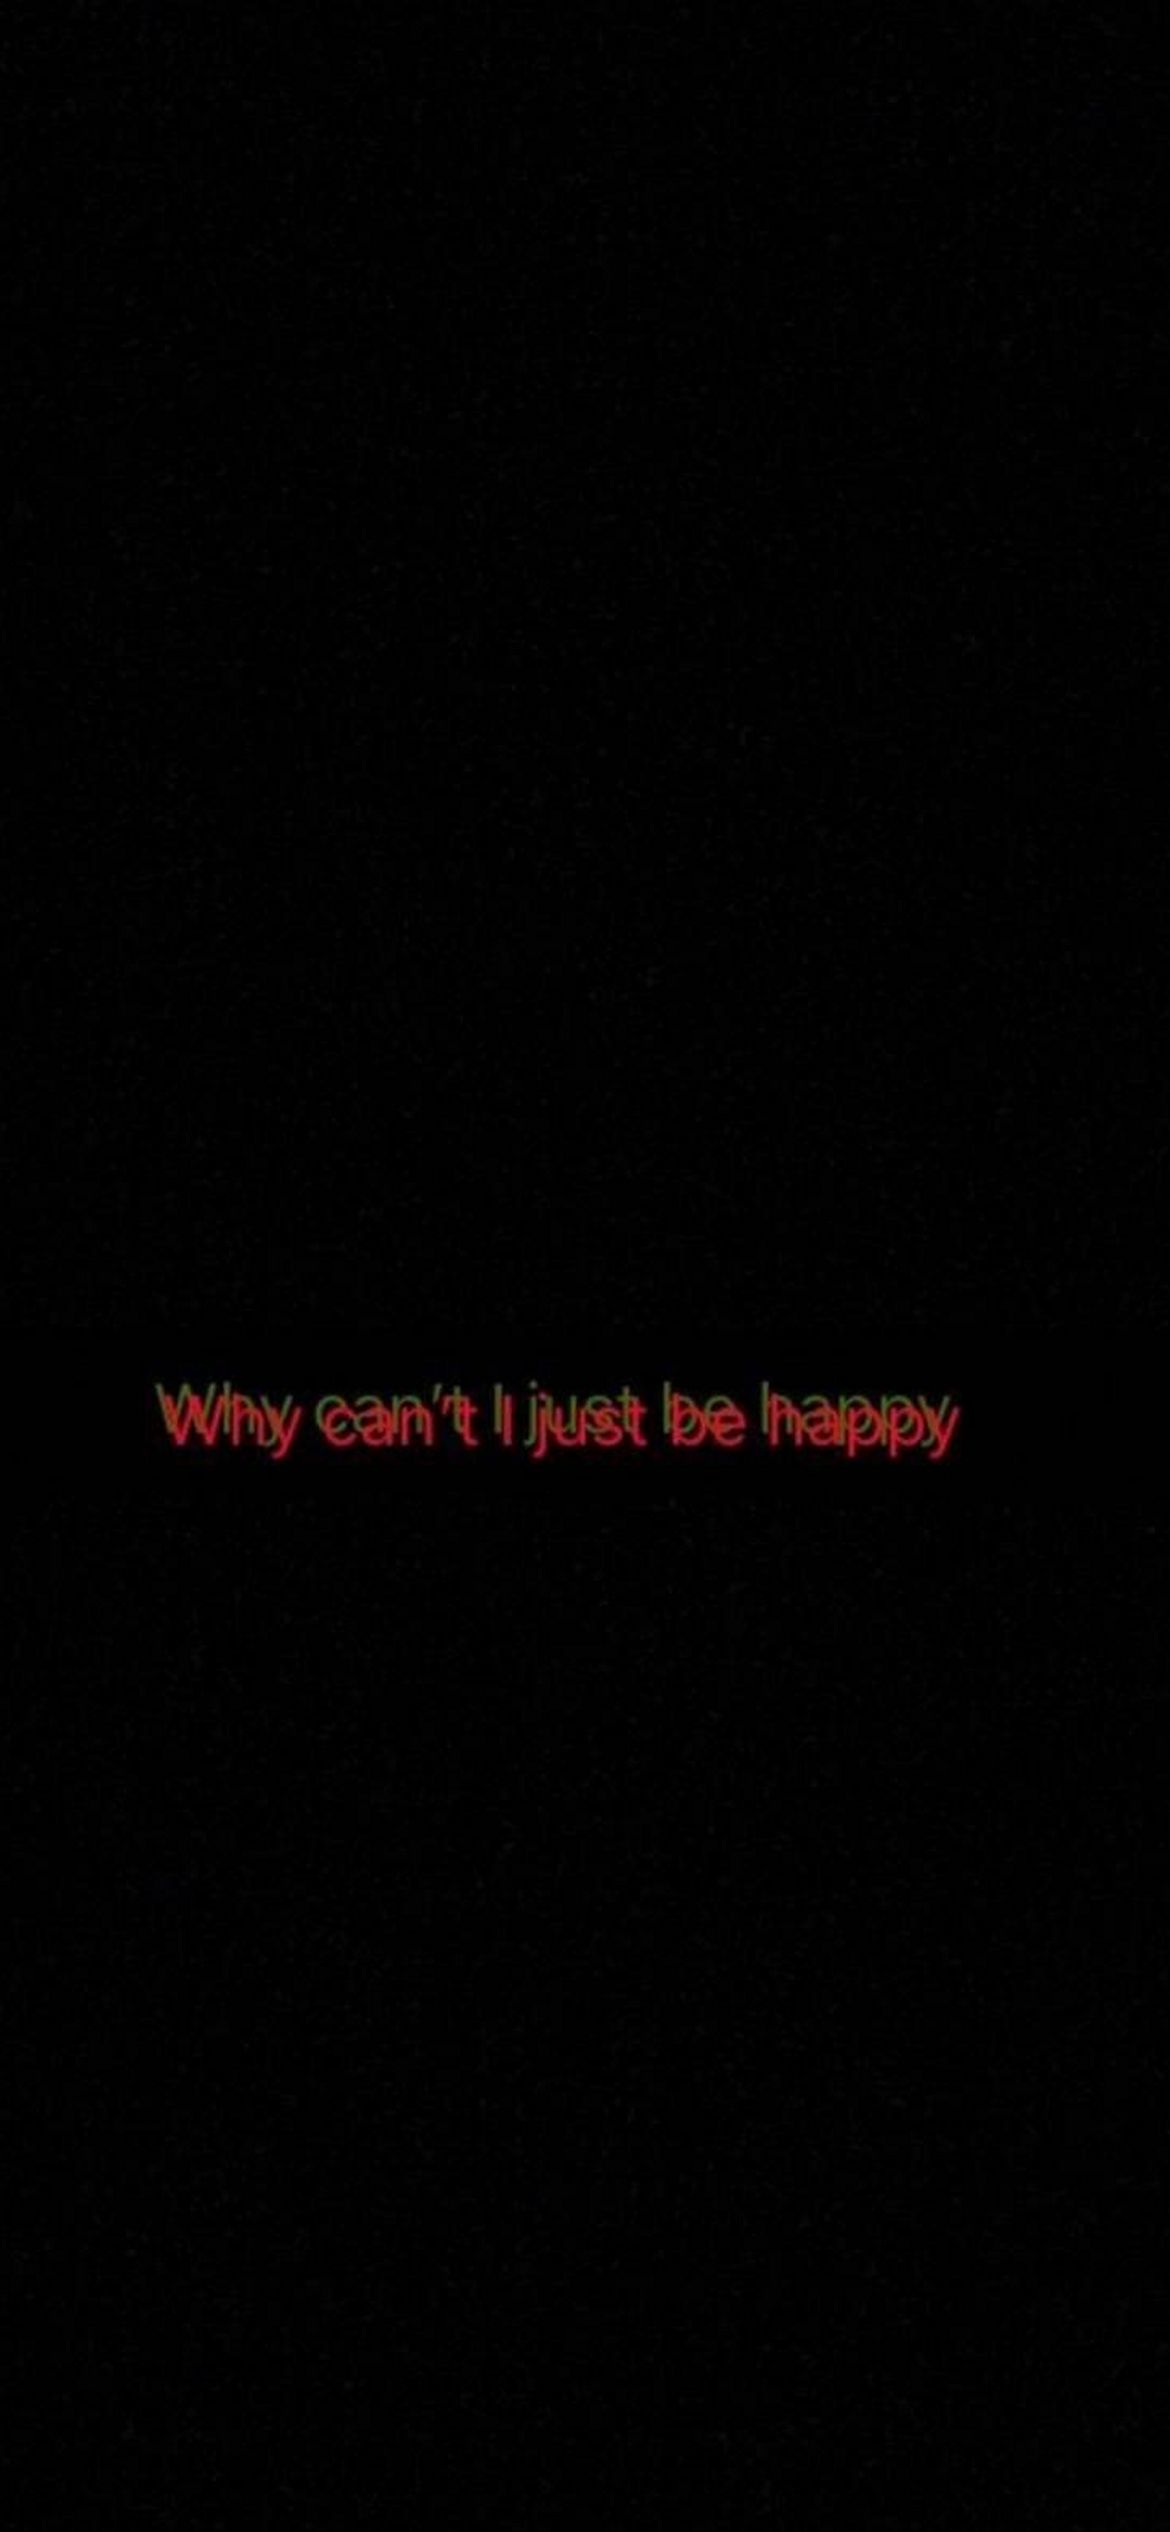 Why can't i just be happy - IPhone